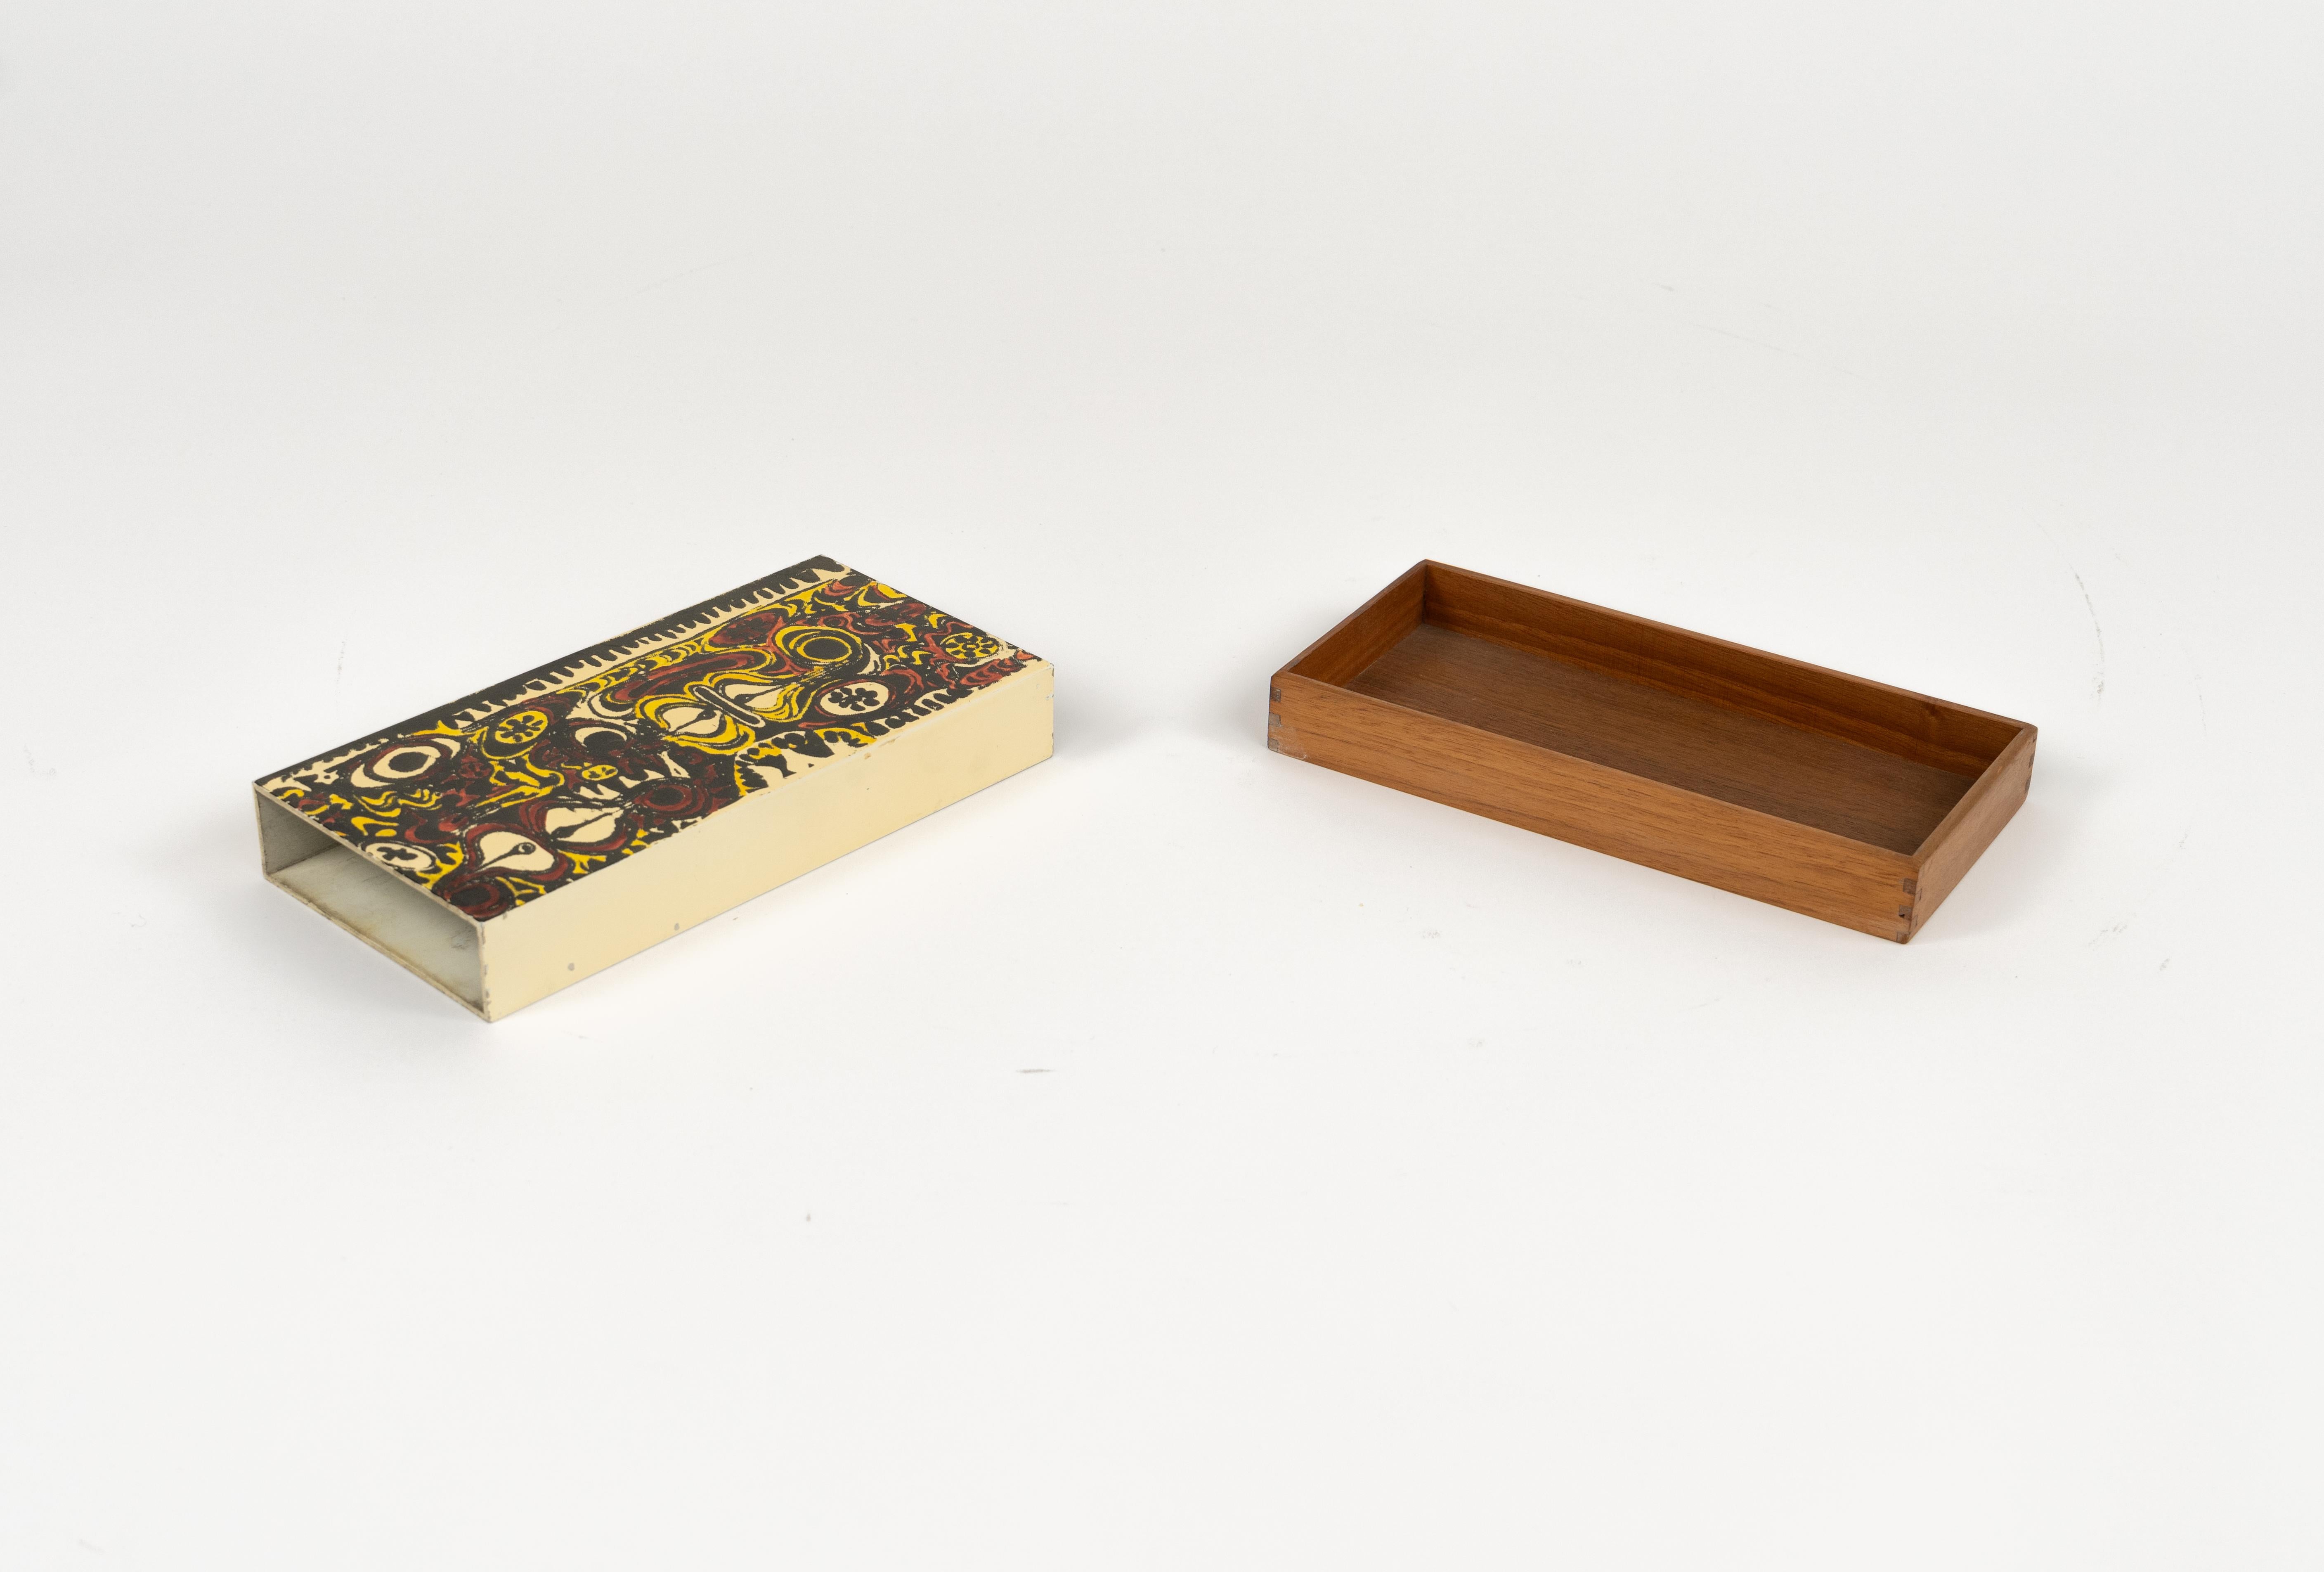 Midcentury Box in Enameled Metal and Wood Att. Piero Fornasetti, Italy 1960s For Sale 1